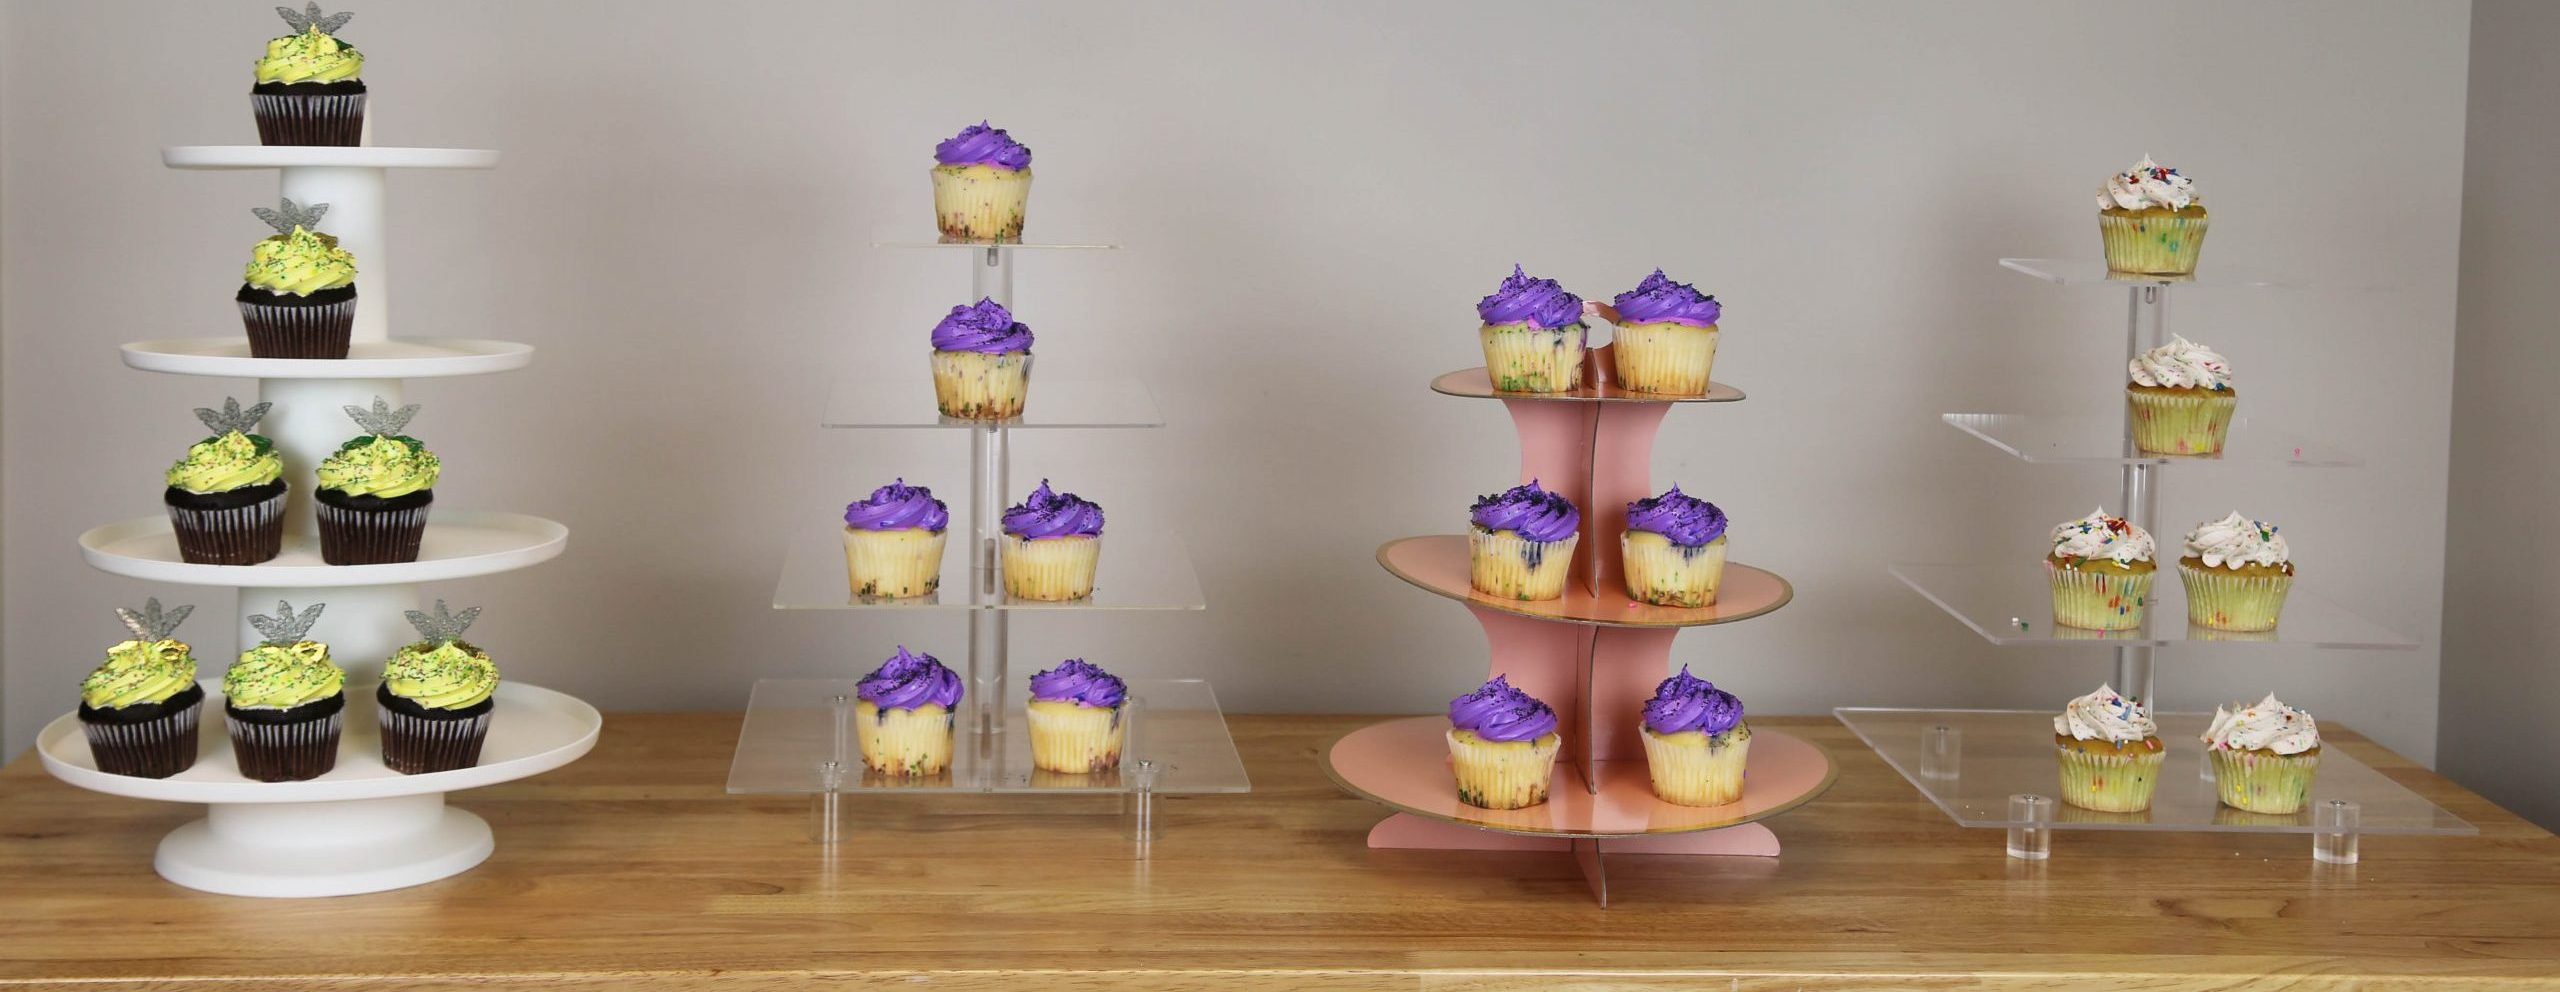 Alessi 1 Pc Pastry Stands Cupcake Tier Holder Cupcake Tower Display 